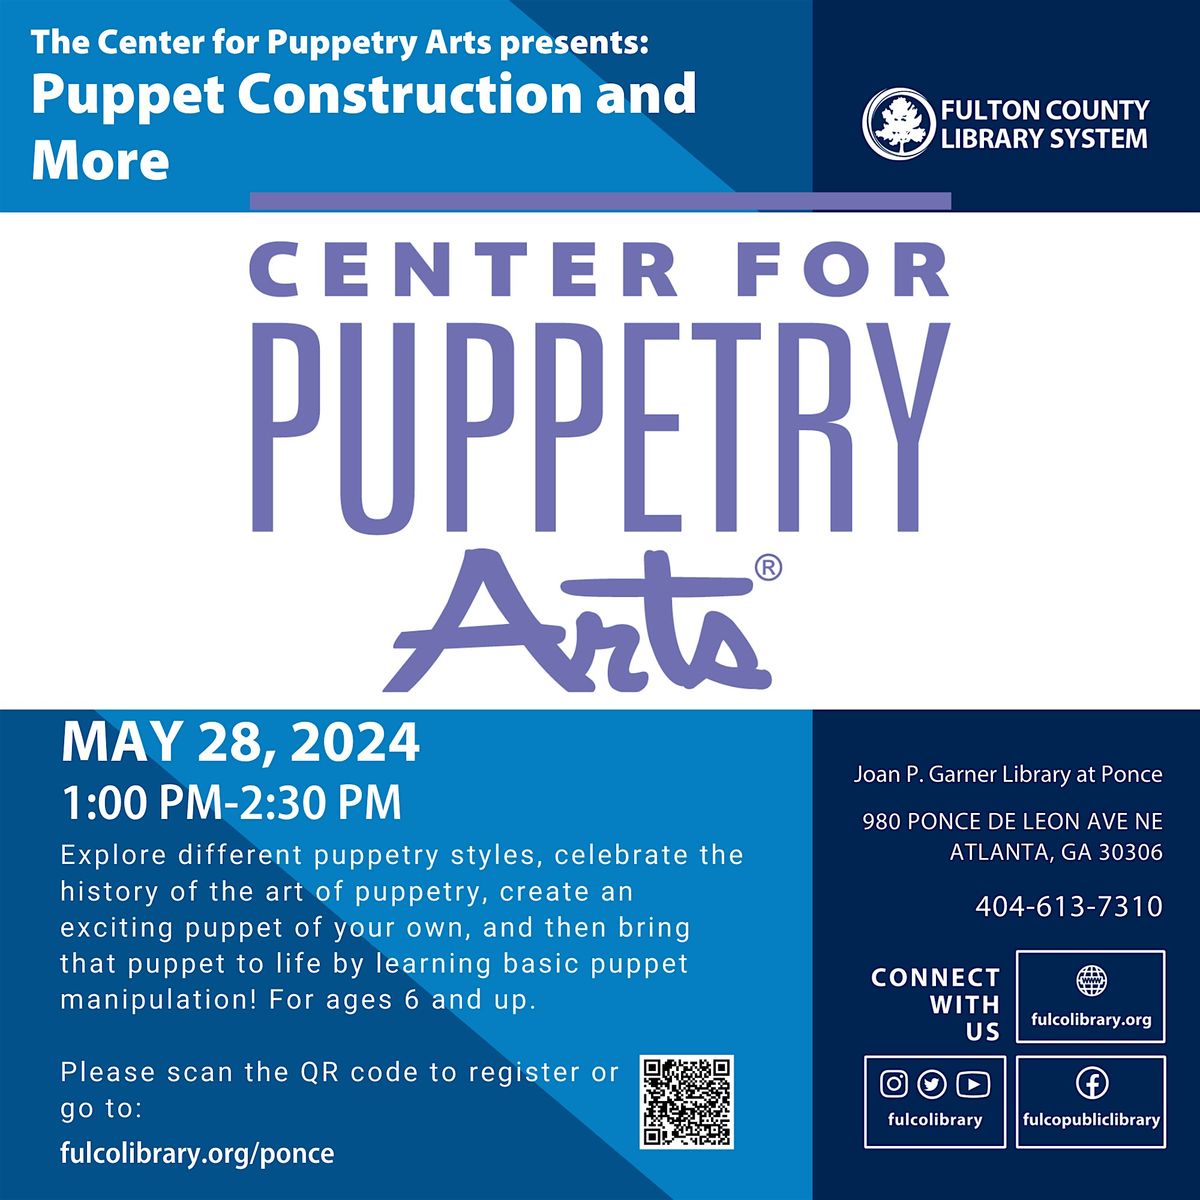 The Center for Puppetry Arts presents:  Puppet Construction and More